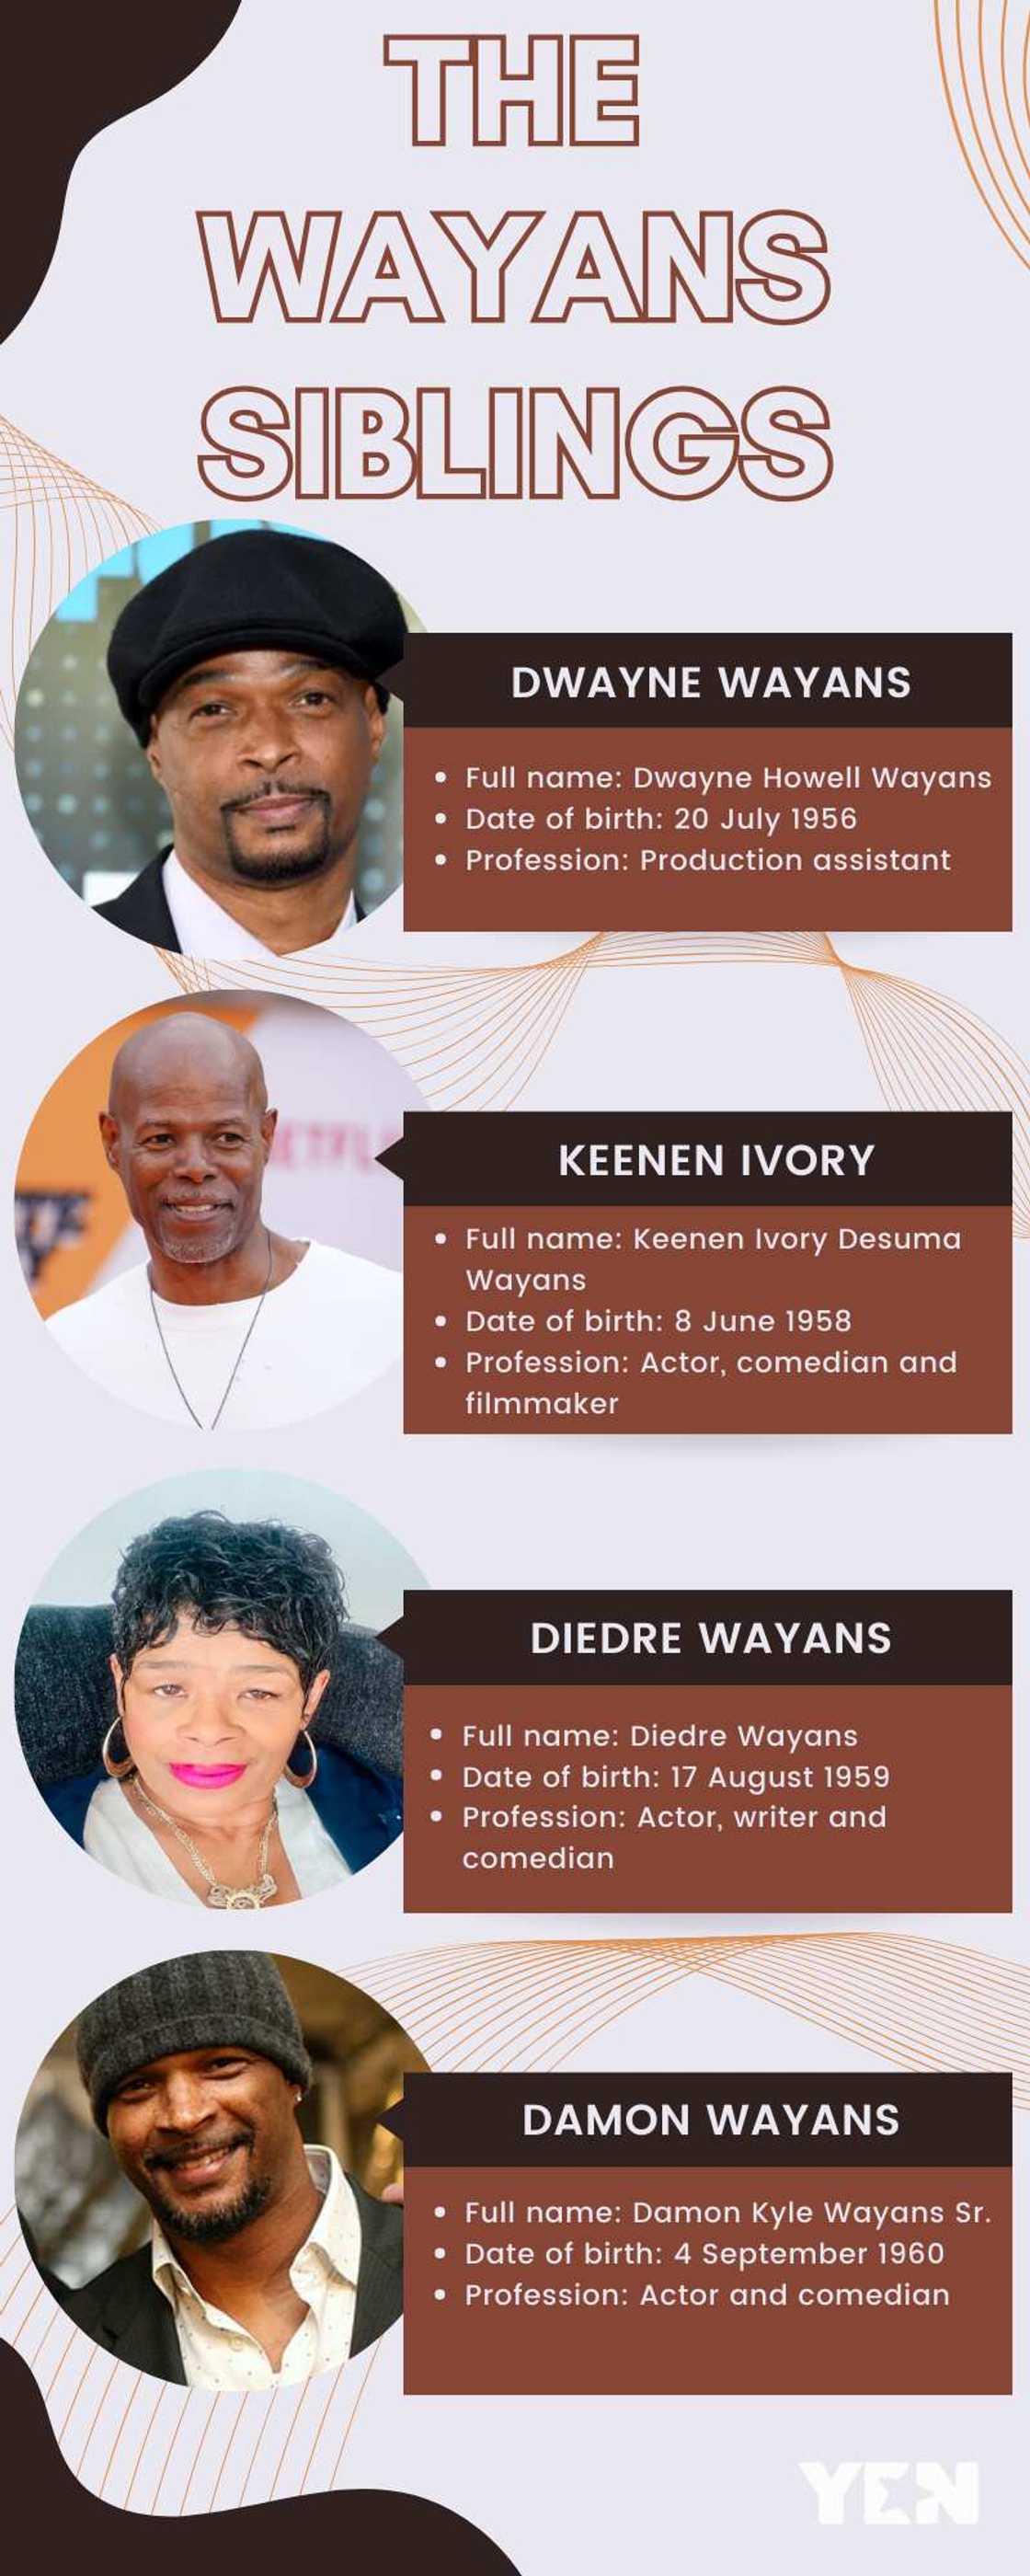 How many siblings are in the Wayans family?